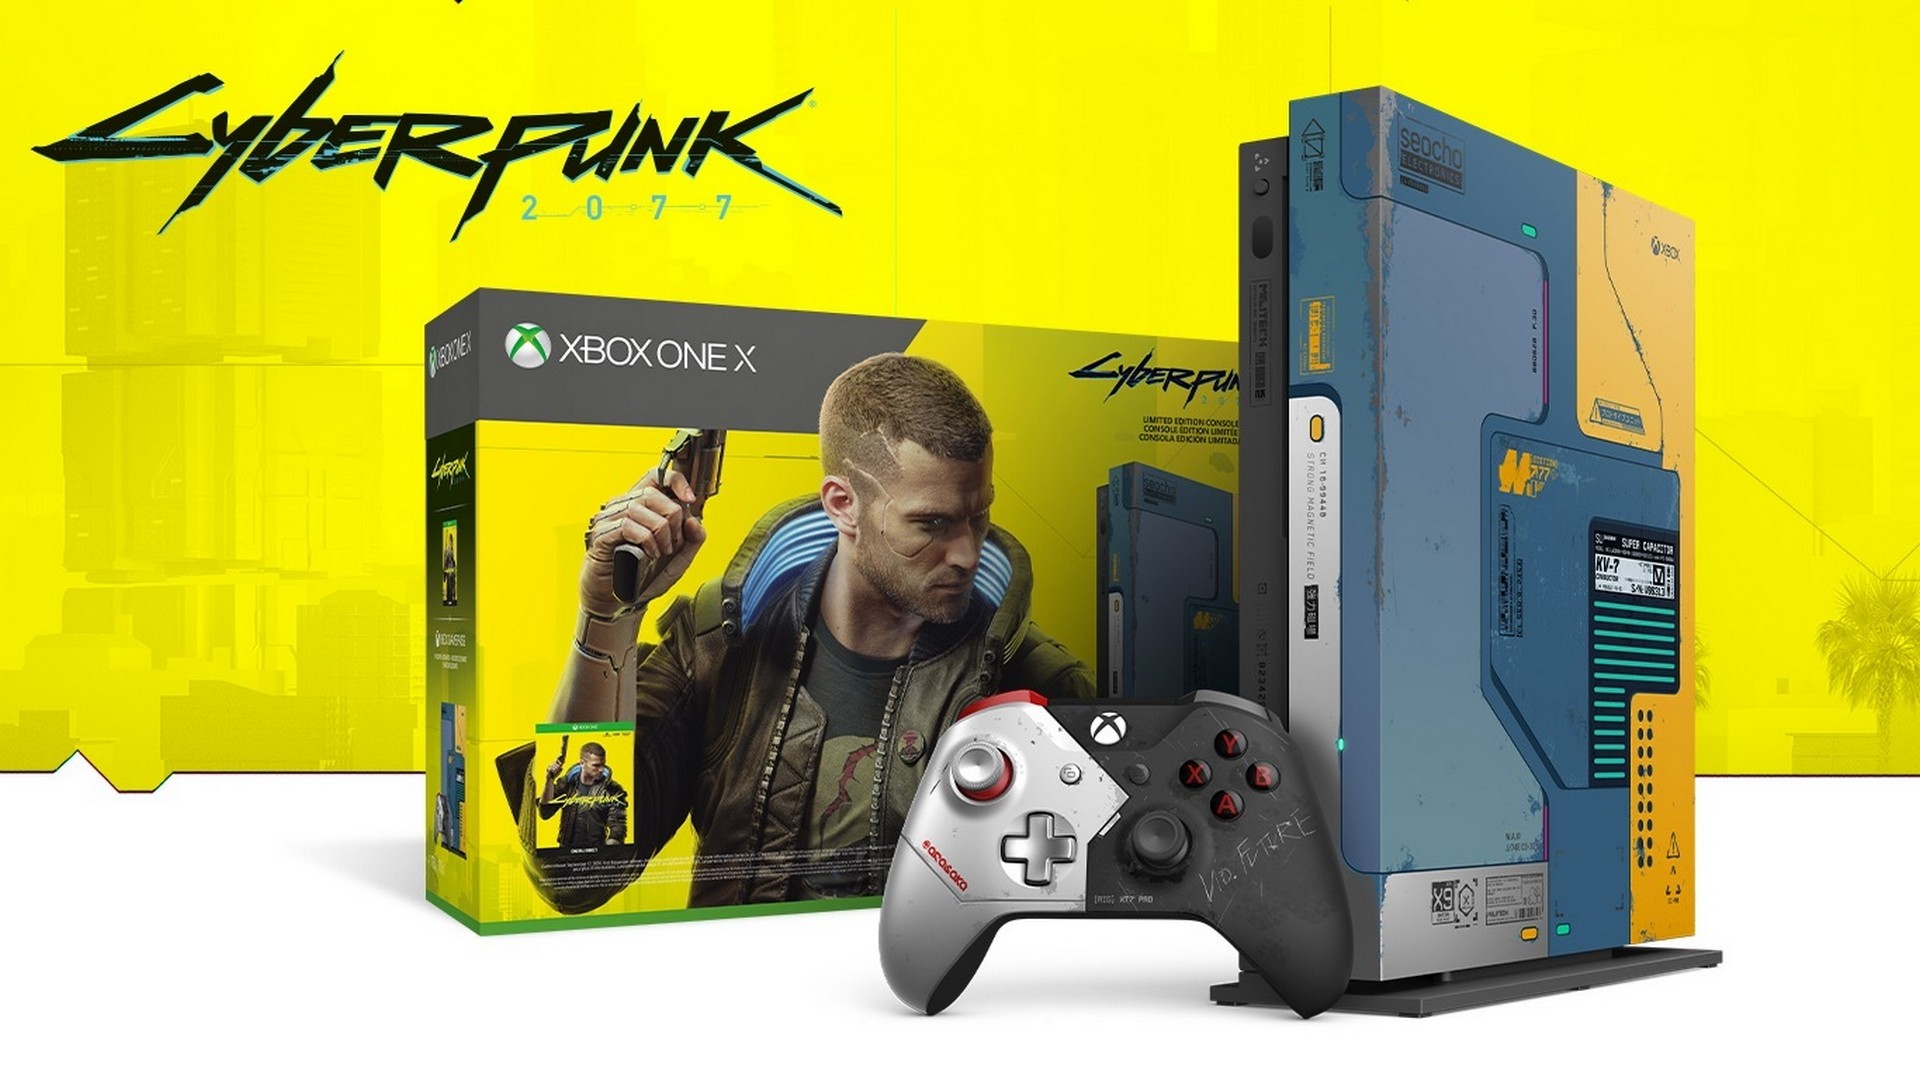 Own a Rare Piece of Night City with New Xbox One X Cyberpunk 2077 Bundle